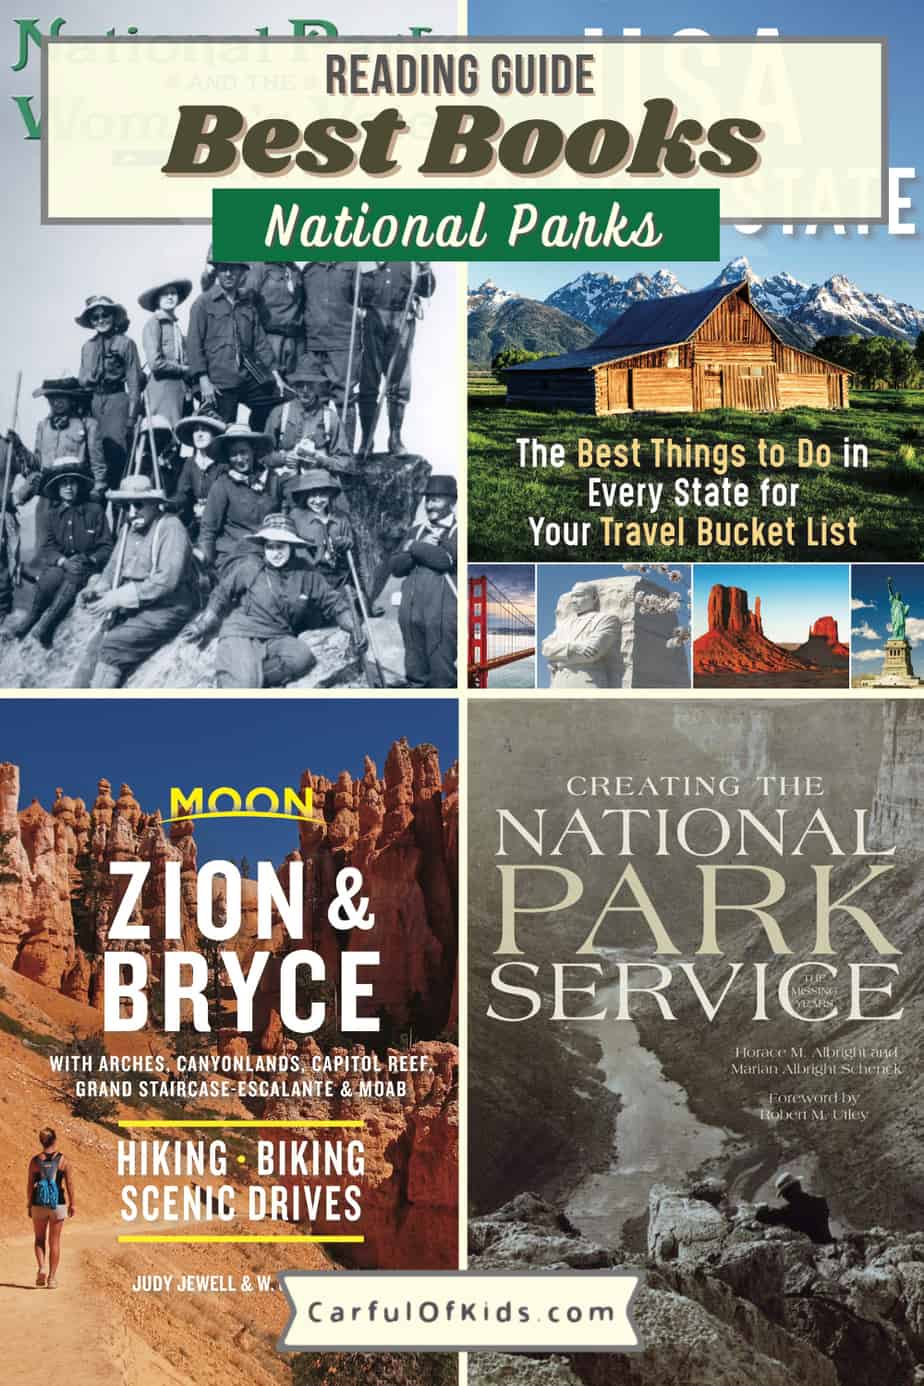 Grab the perfect book for yourself, or the outdoor adventurer, history buff or the kids in your life. Find a National Parks book for everyone, including those who don't camp. Best Books for National Park Fans | Books about the National Parks #NationalParks #TravelBooks #Books